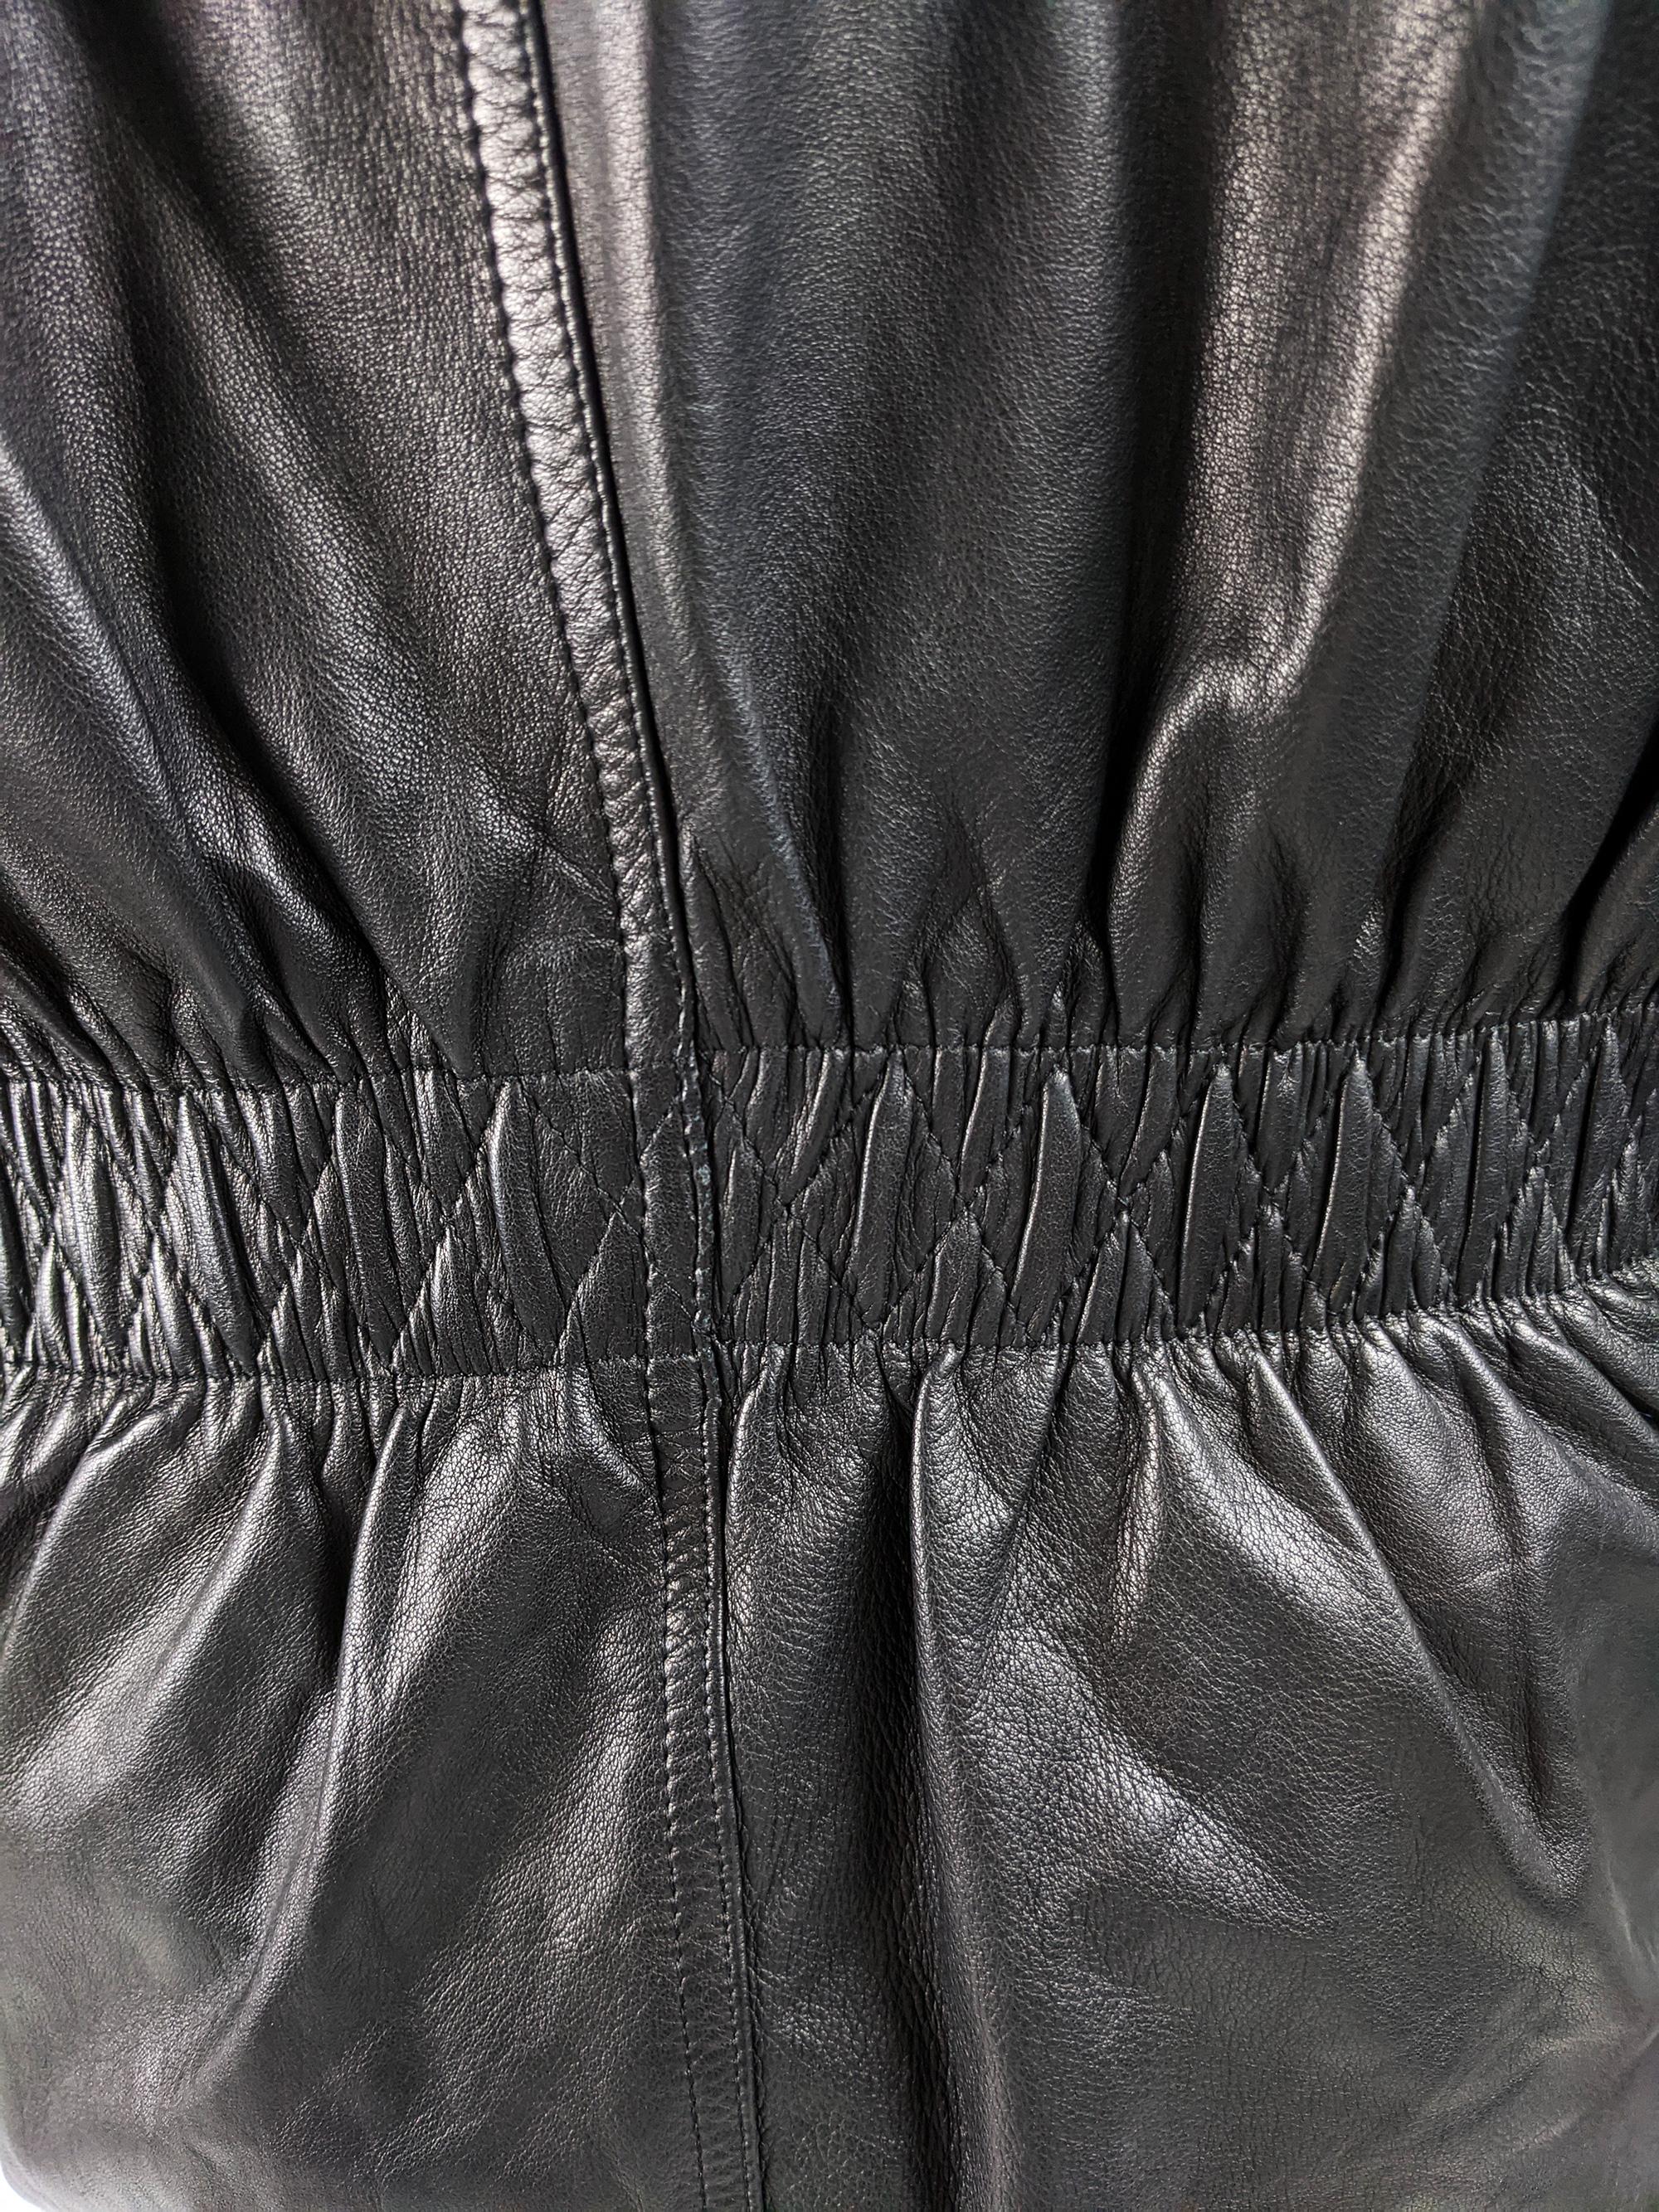 Men's Gianni Versace Rare Mens Leather Jacket, A/W 1986